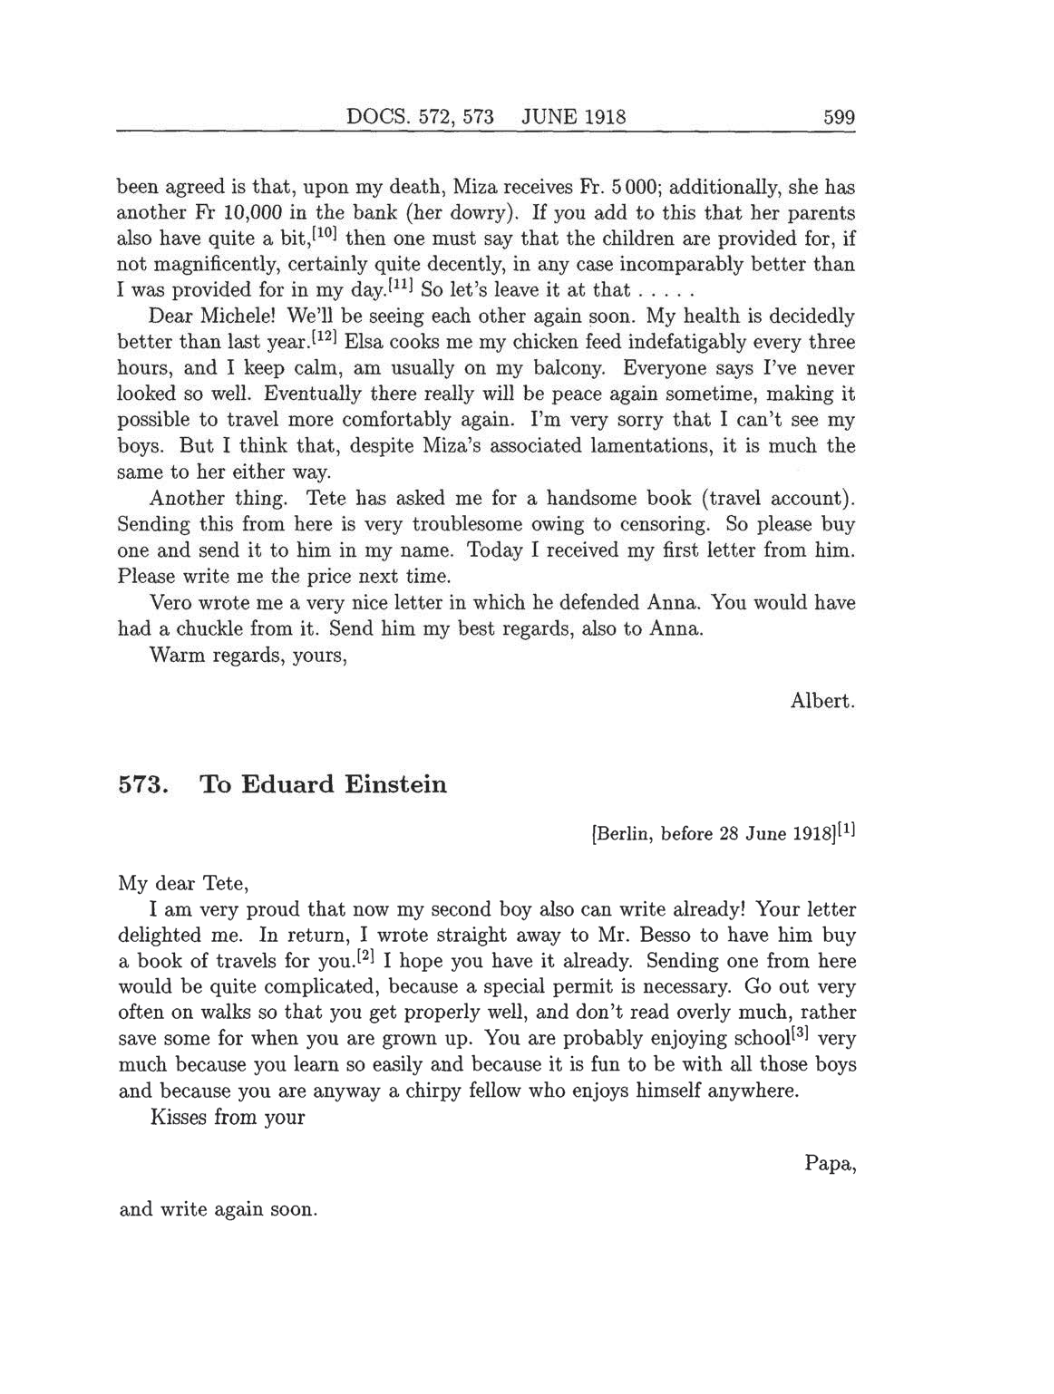 Volume 8: The Berlin Years: Correspondence, 1914-1918 (English translation supplement) page 599